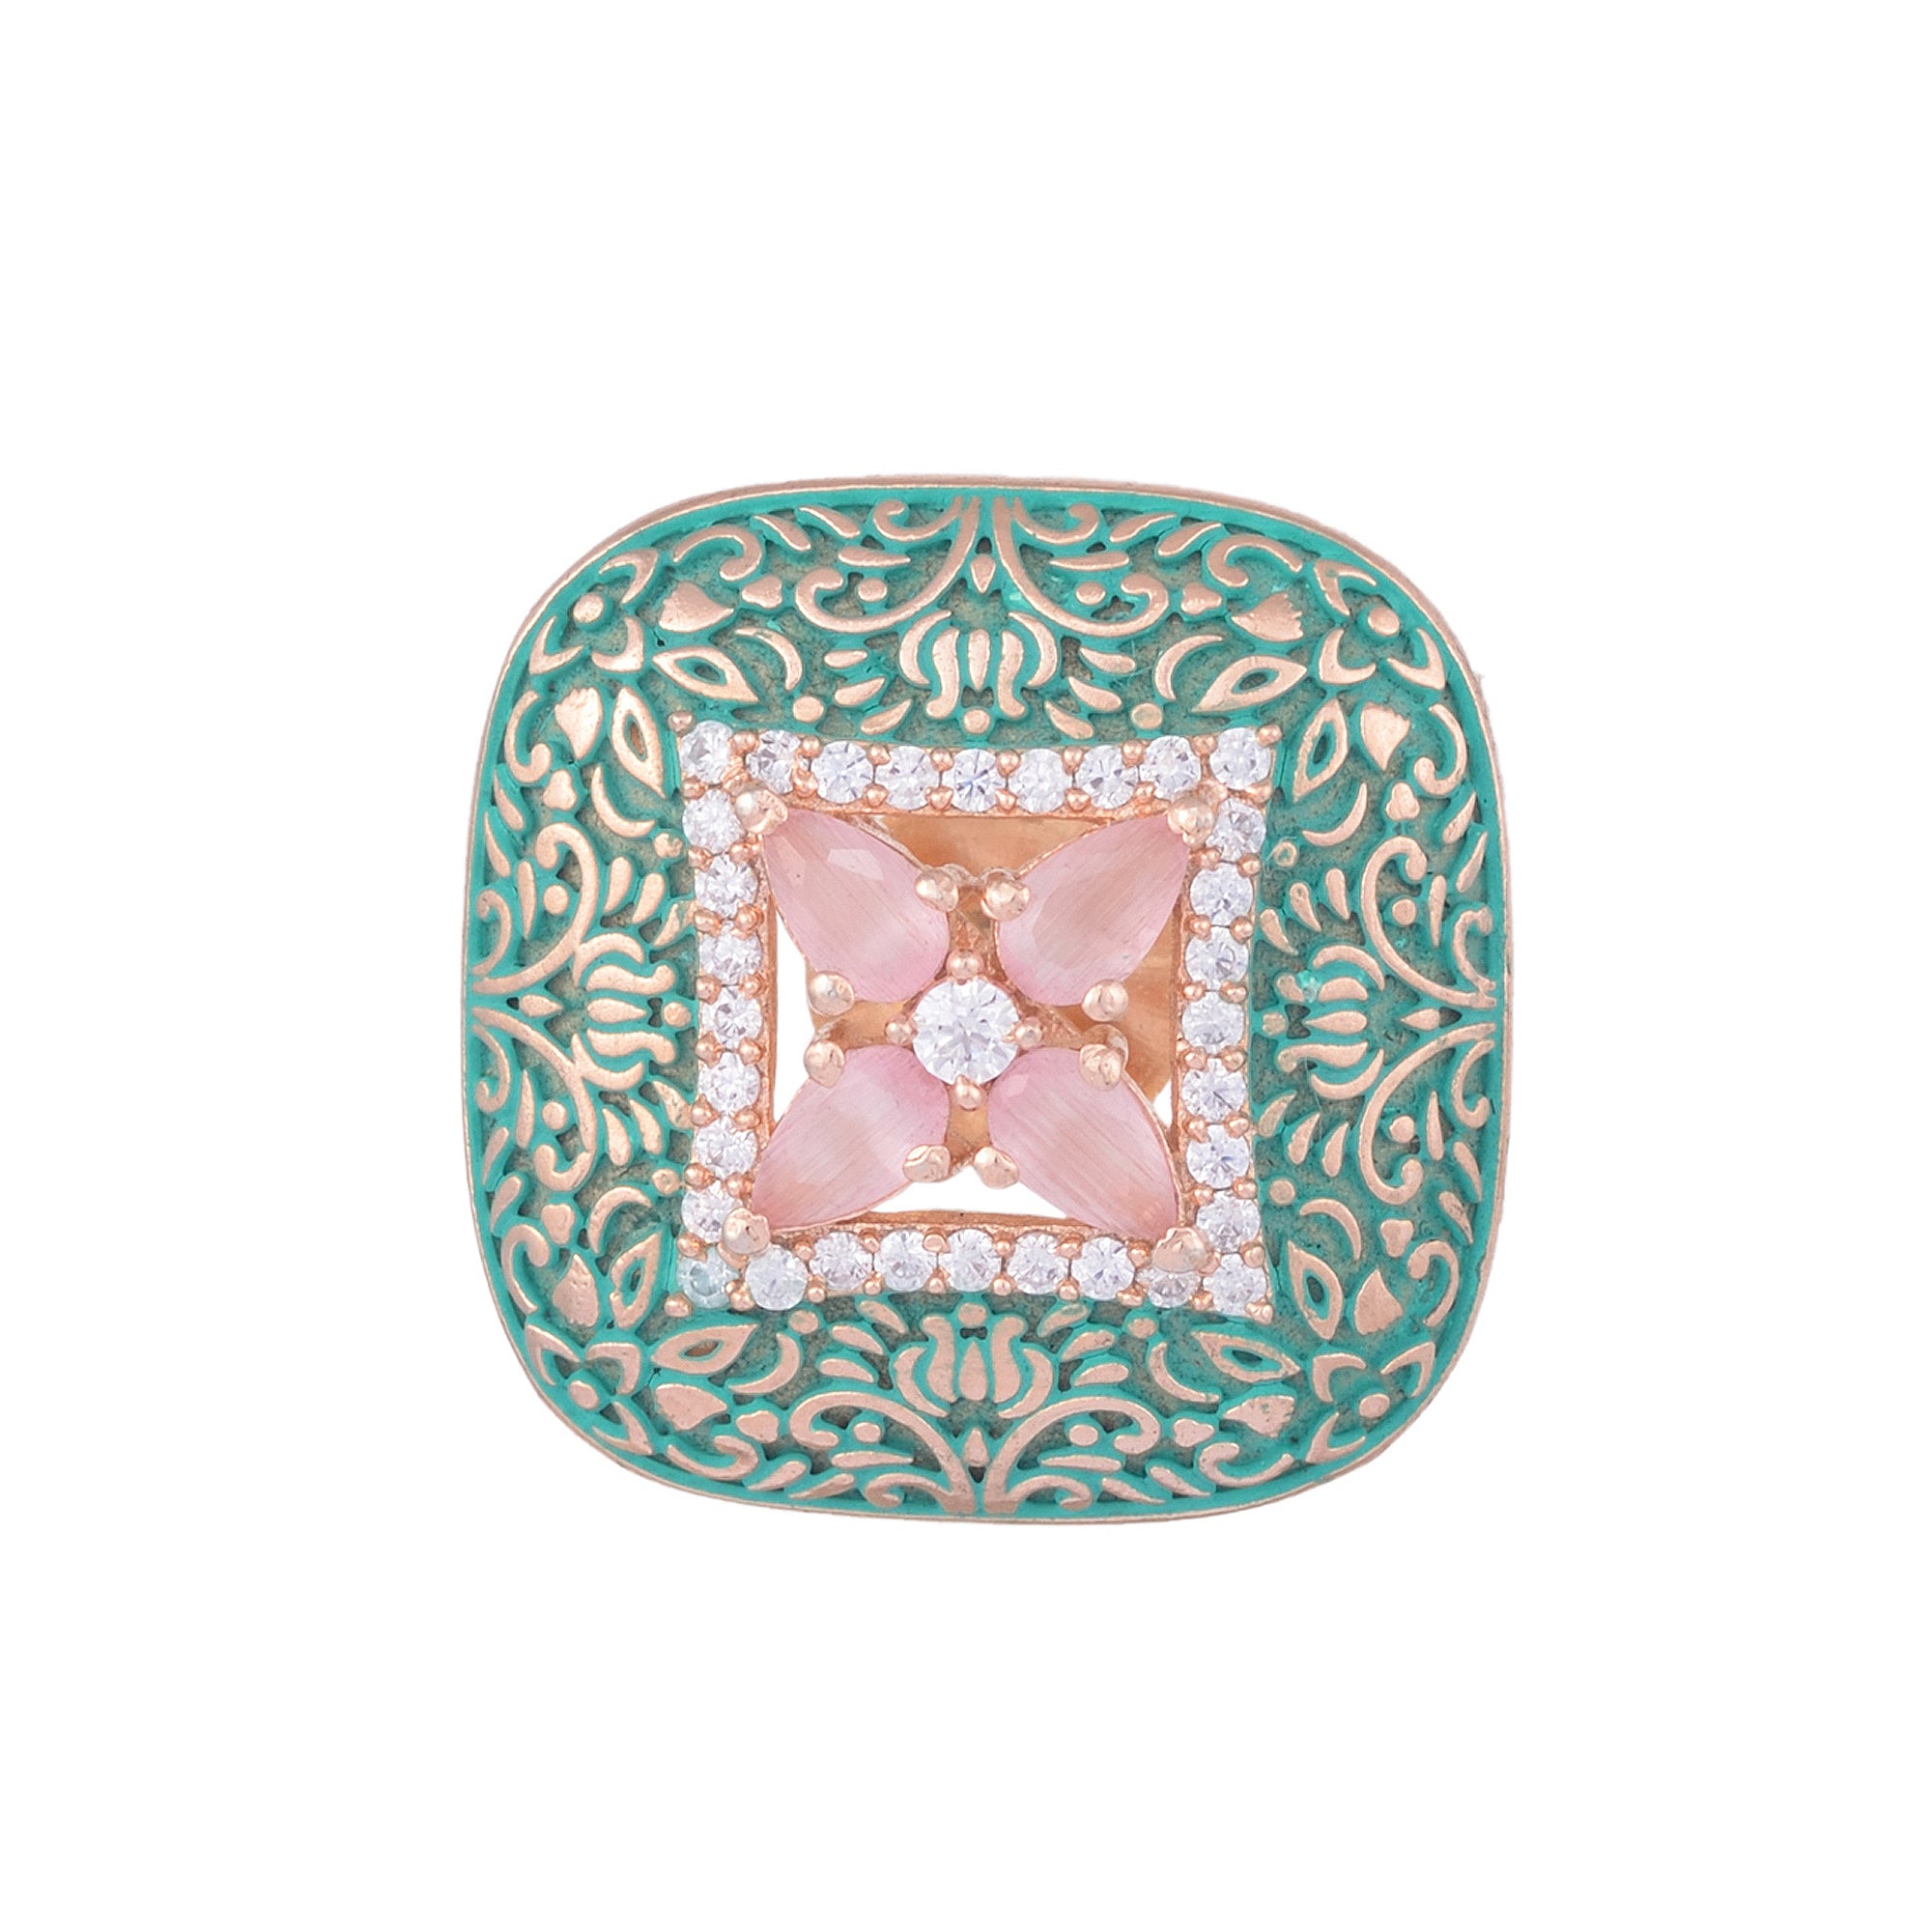 Teal Enamelled Studs Green Meenakari & Pastel Pink Ad Small Earrings for Women and Girls - Saraf RS Jewellery